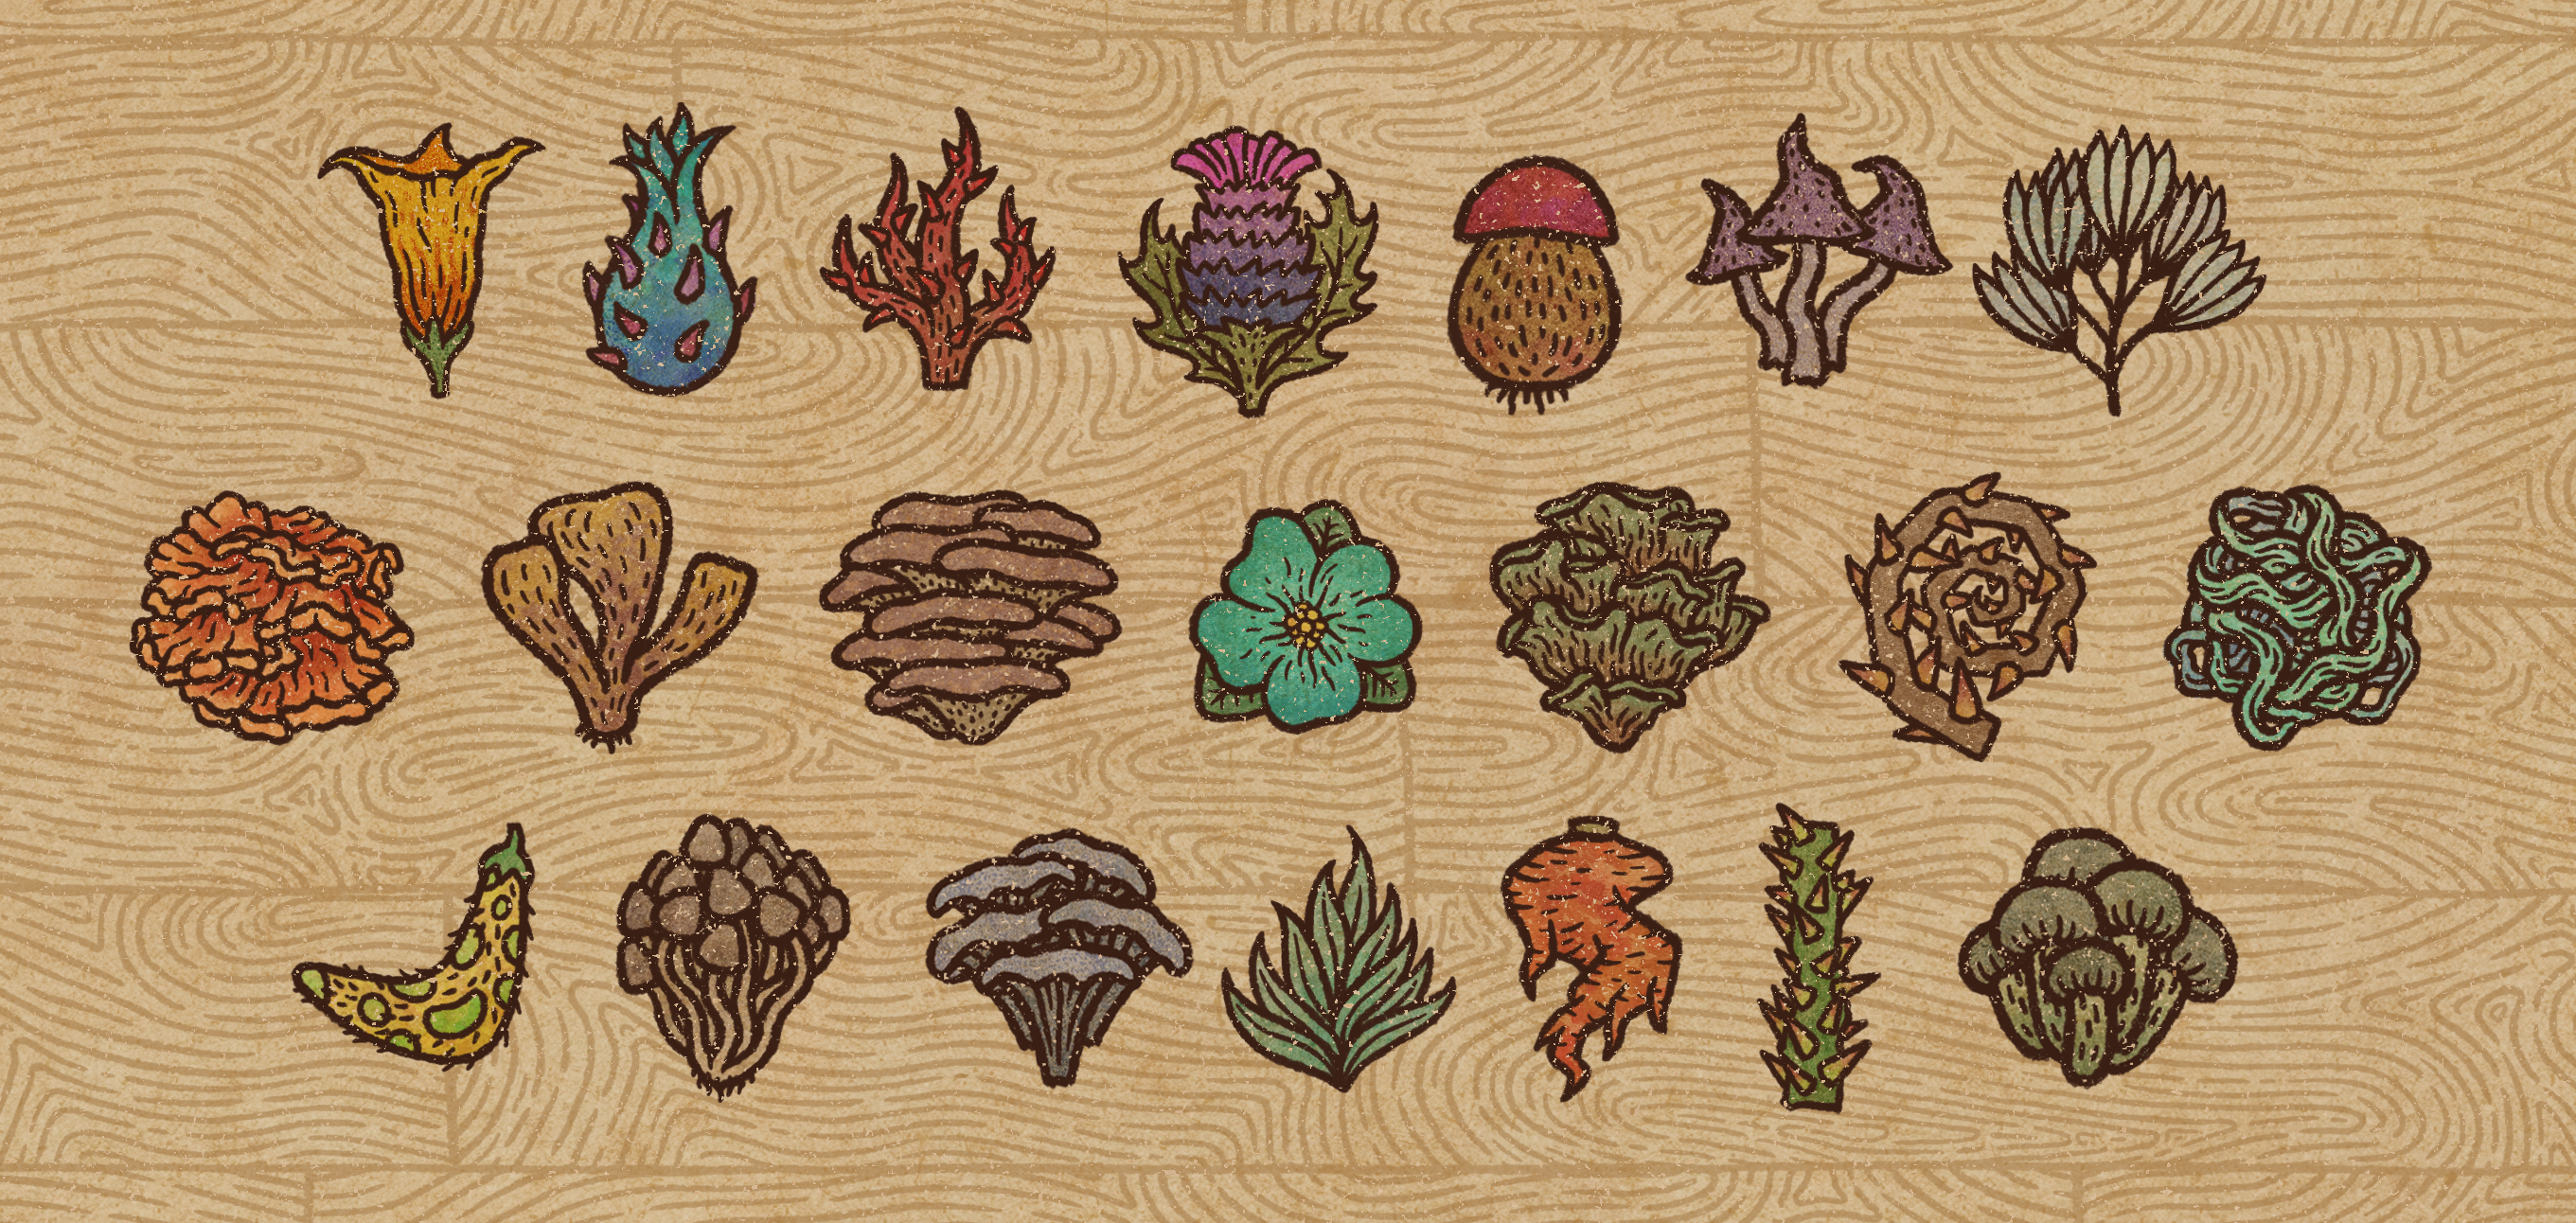 HD desktop wallpaper featuring various hand-drawn herbs and ingredients from Potion Craft: Alchemist Simulator game, artfully arranged on a wooden texture background.